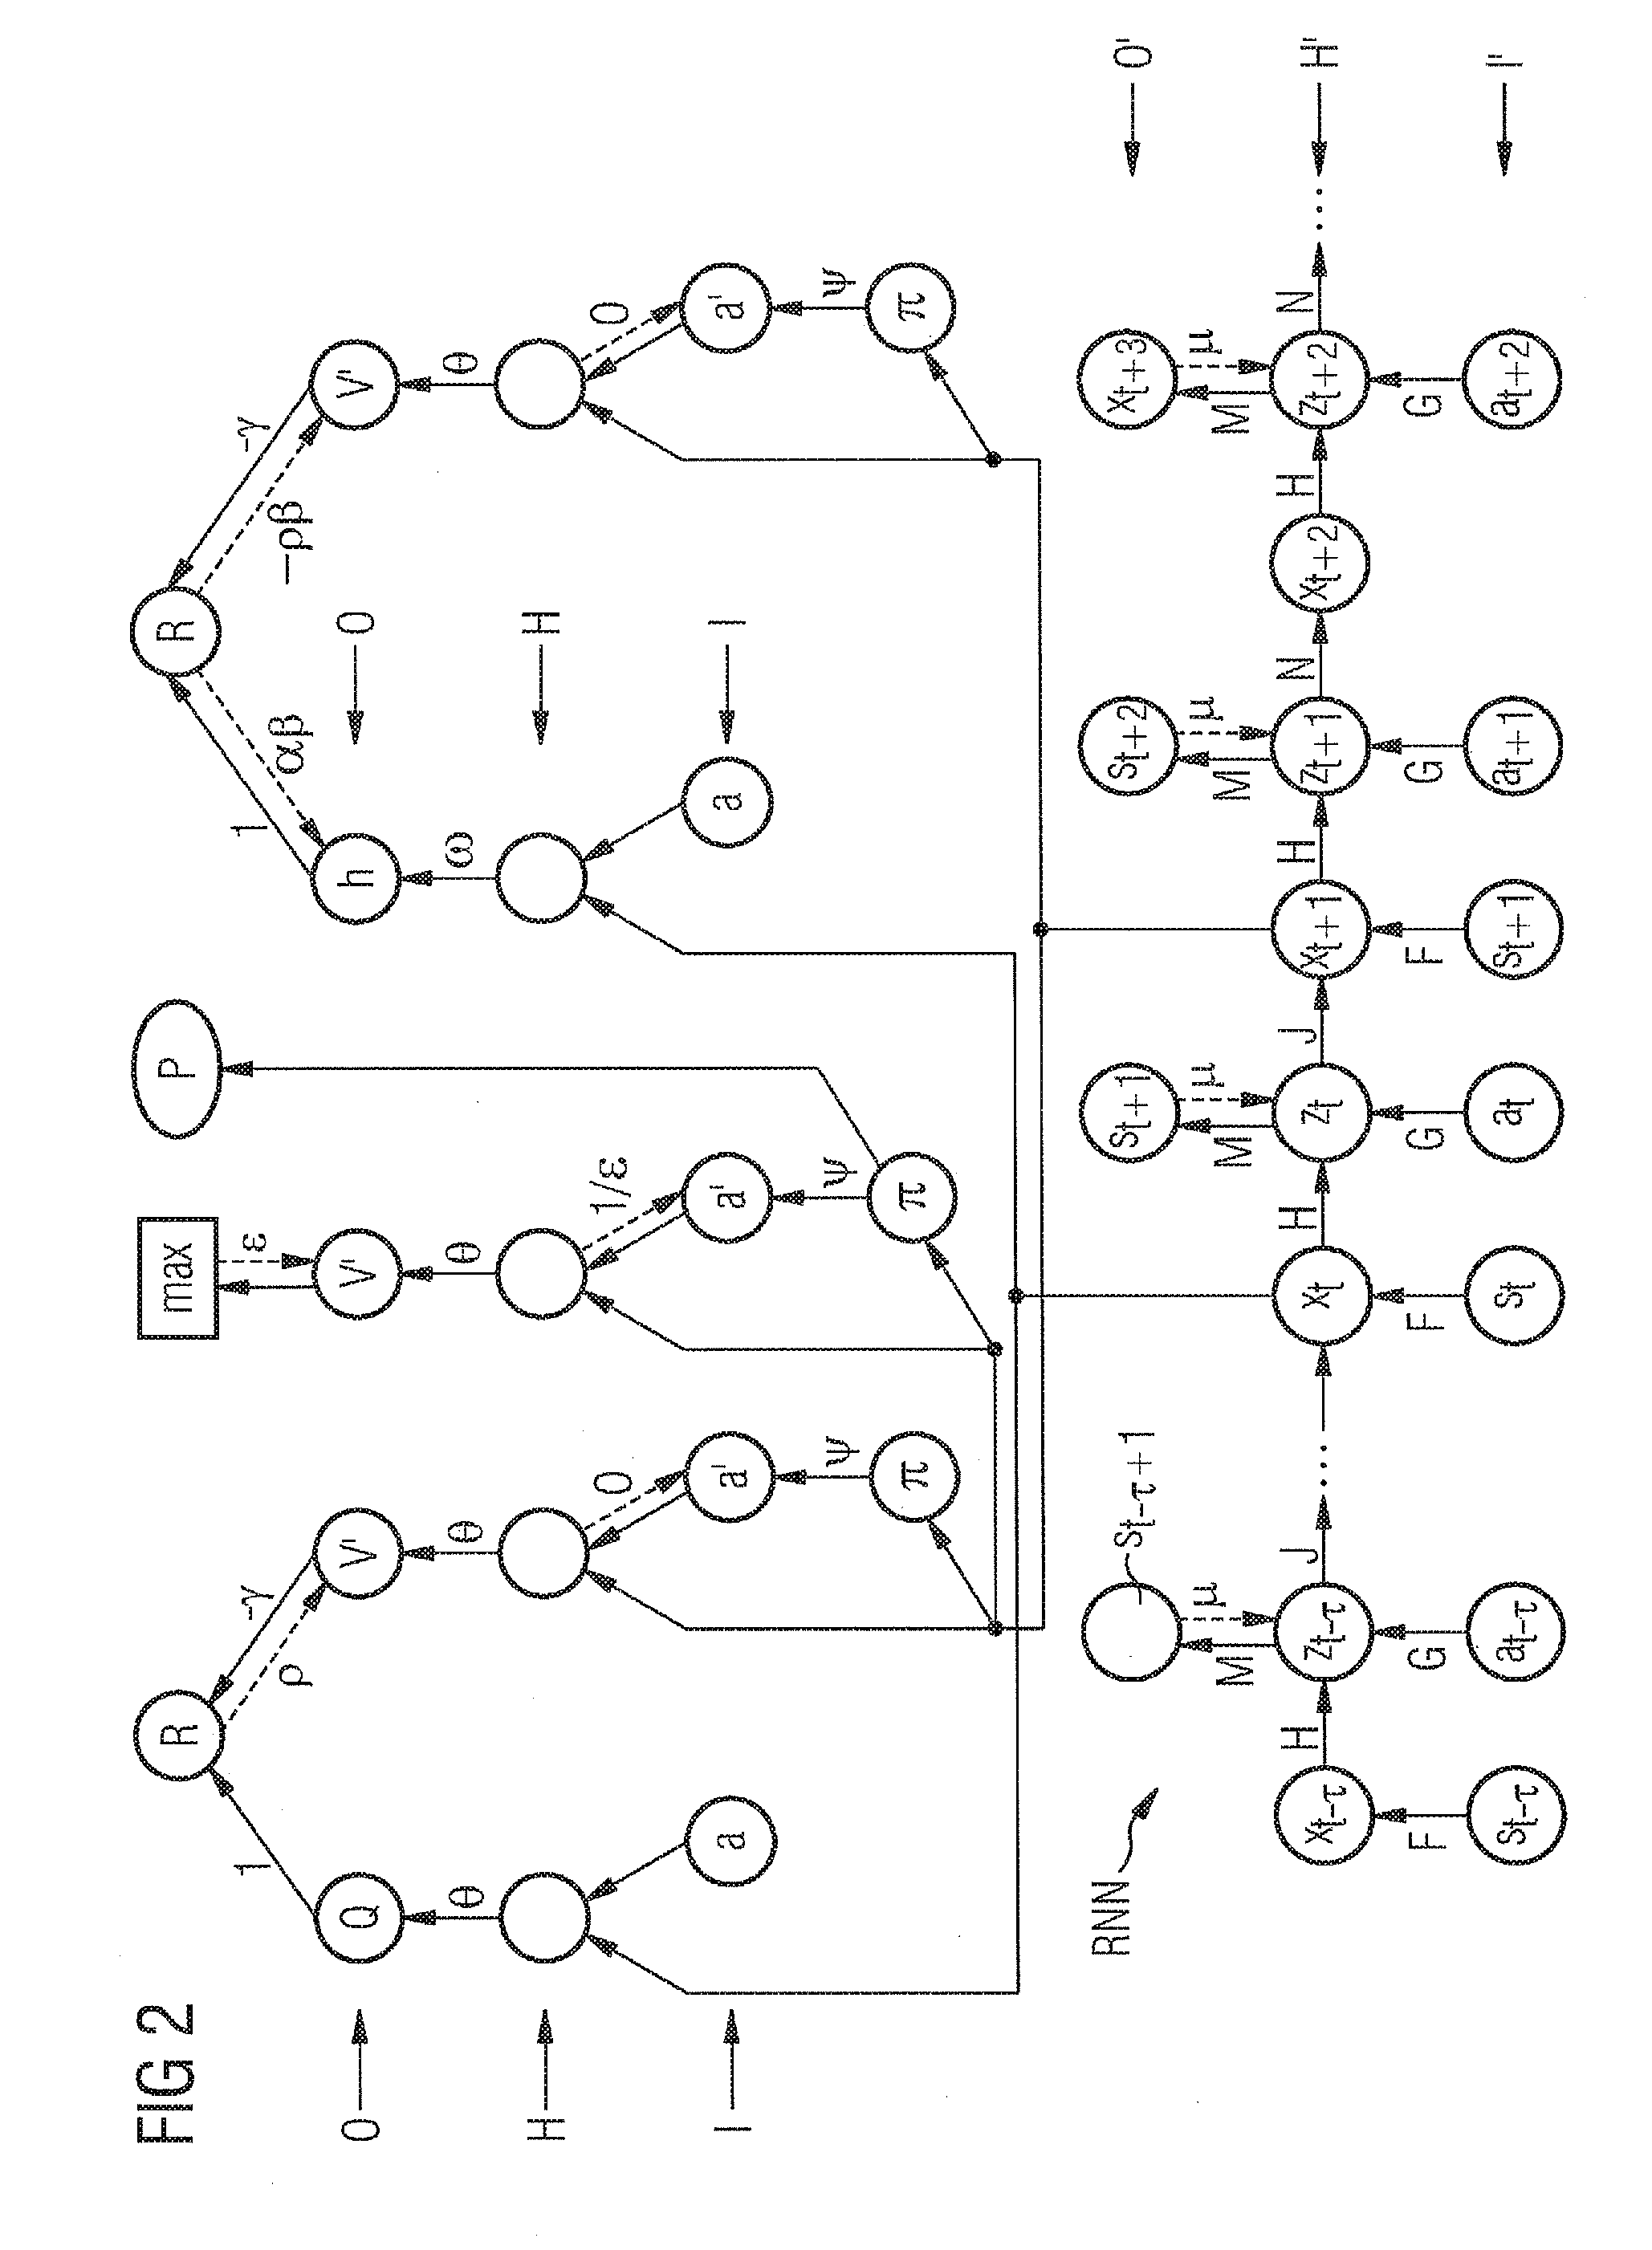 Method for computer-aided control and/or regulation using two neural networks wherein the second neural network models a quality function and can be used to control a gas turbine